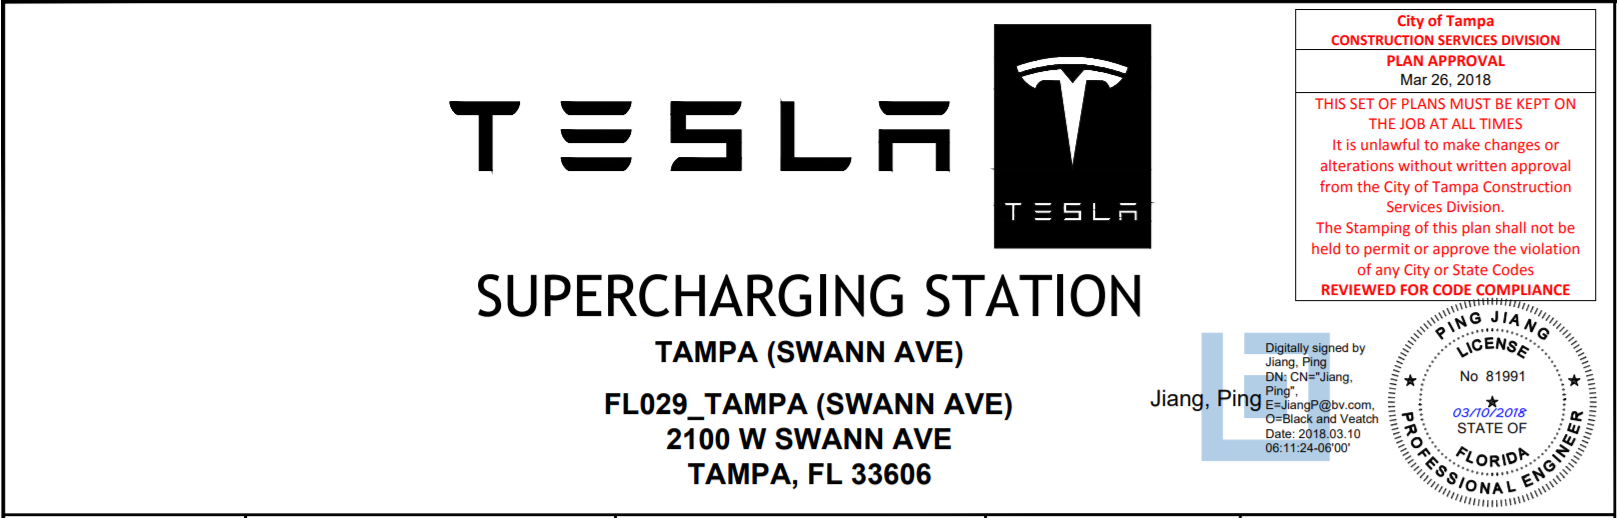 Tampa Hyde Park Supercharger.png